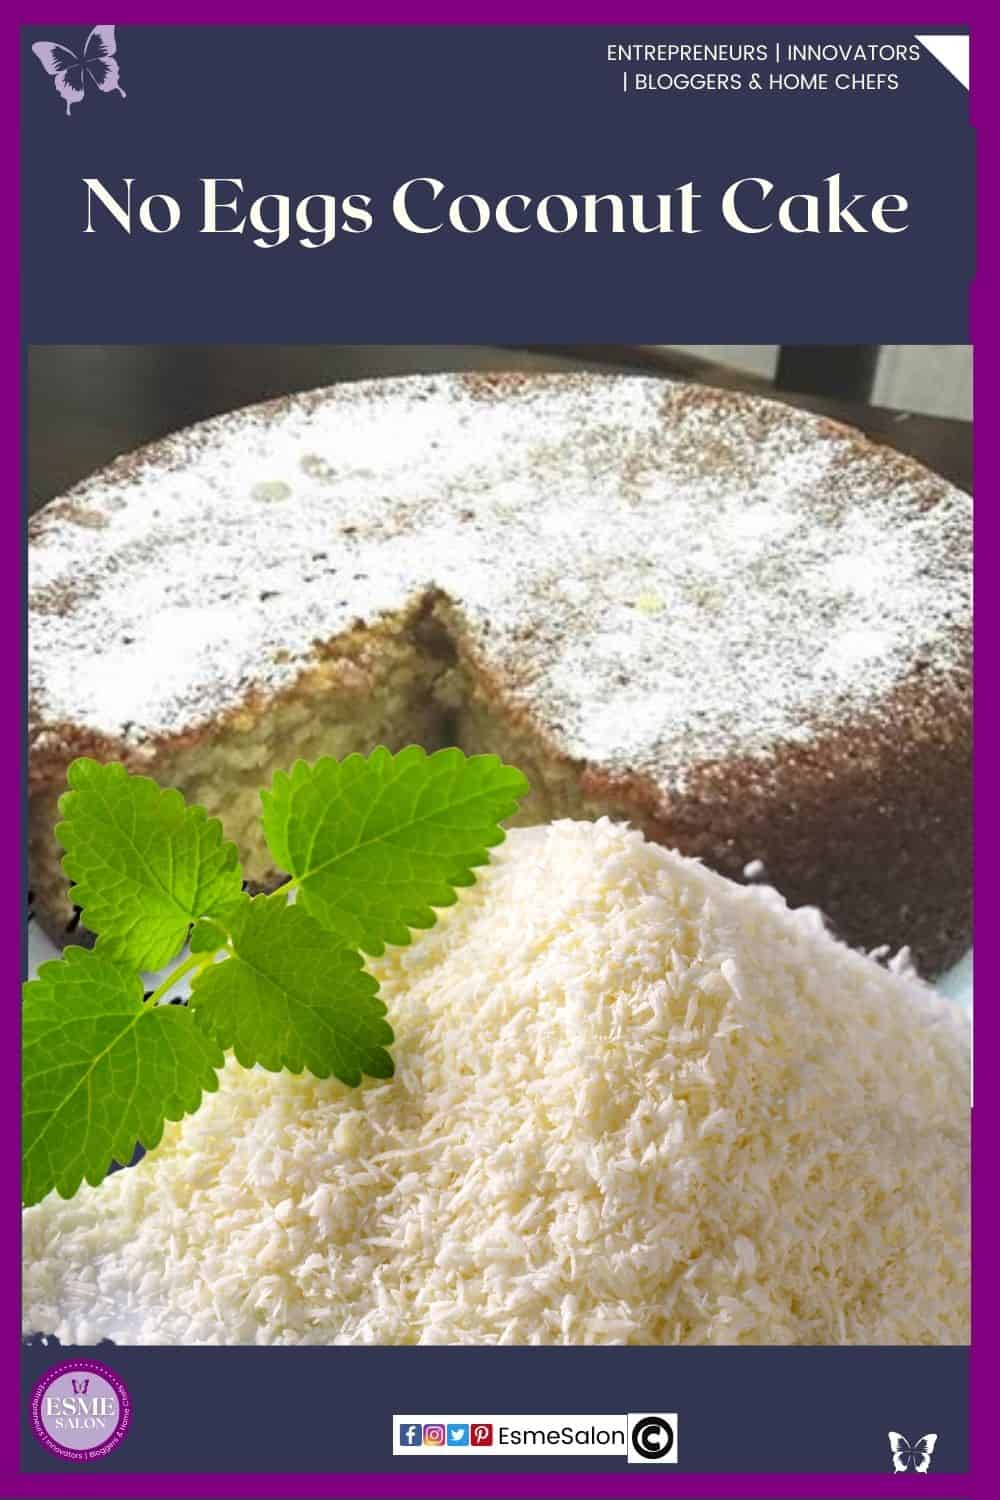 an image of a sliced Eggless Coconut Cake dusted with icing sugar